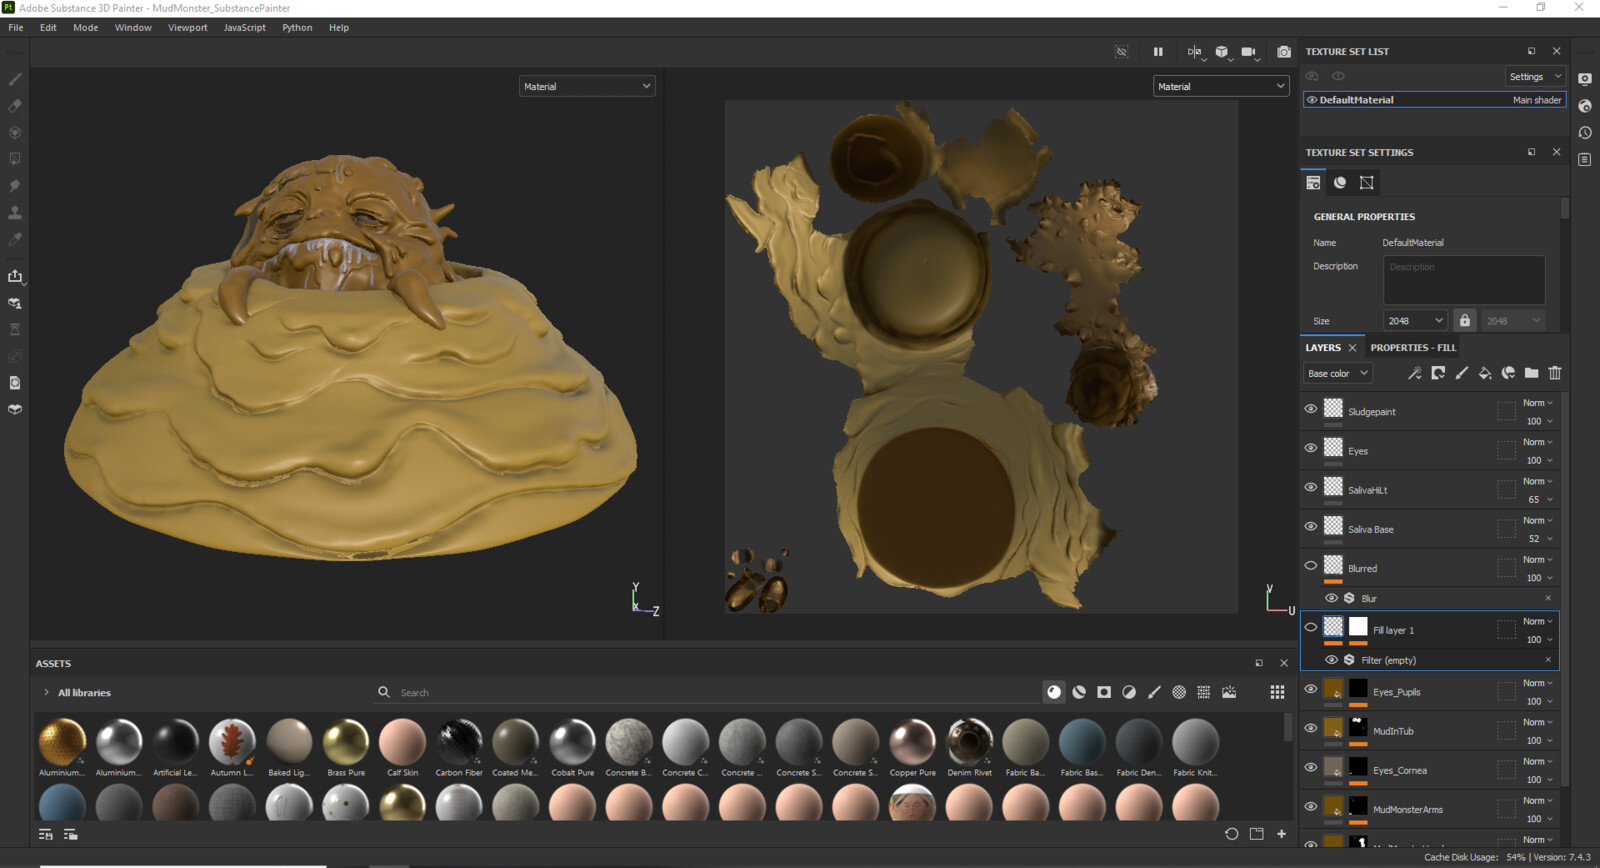 View of MudMonster in Substance Painter with lit materials.